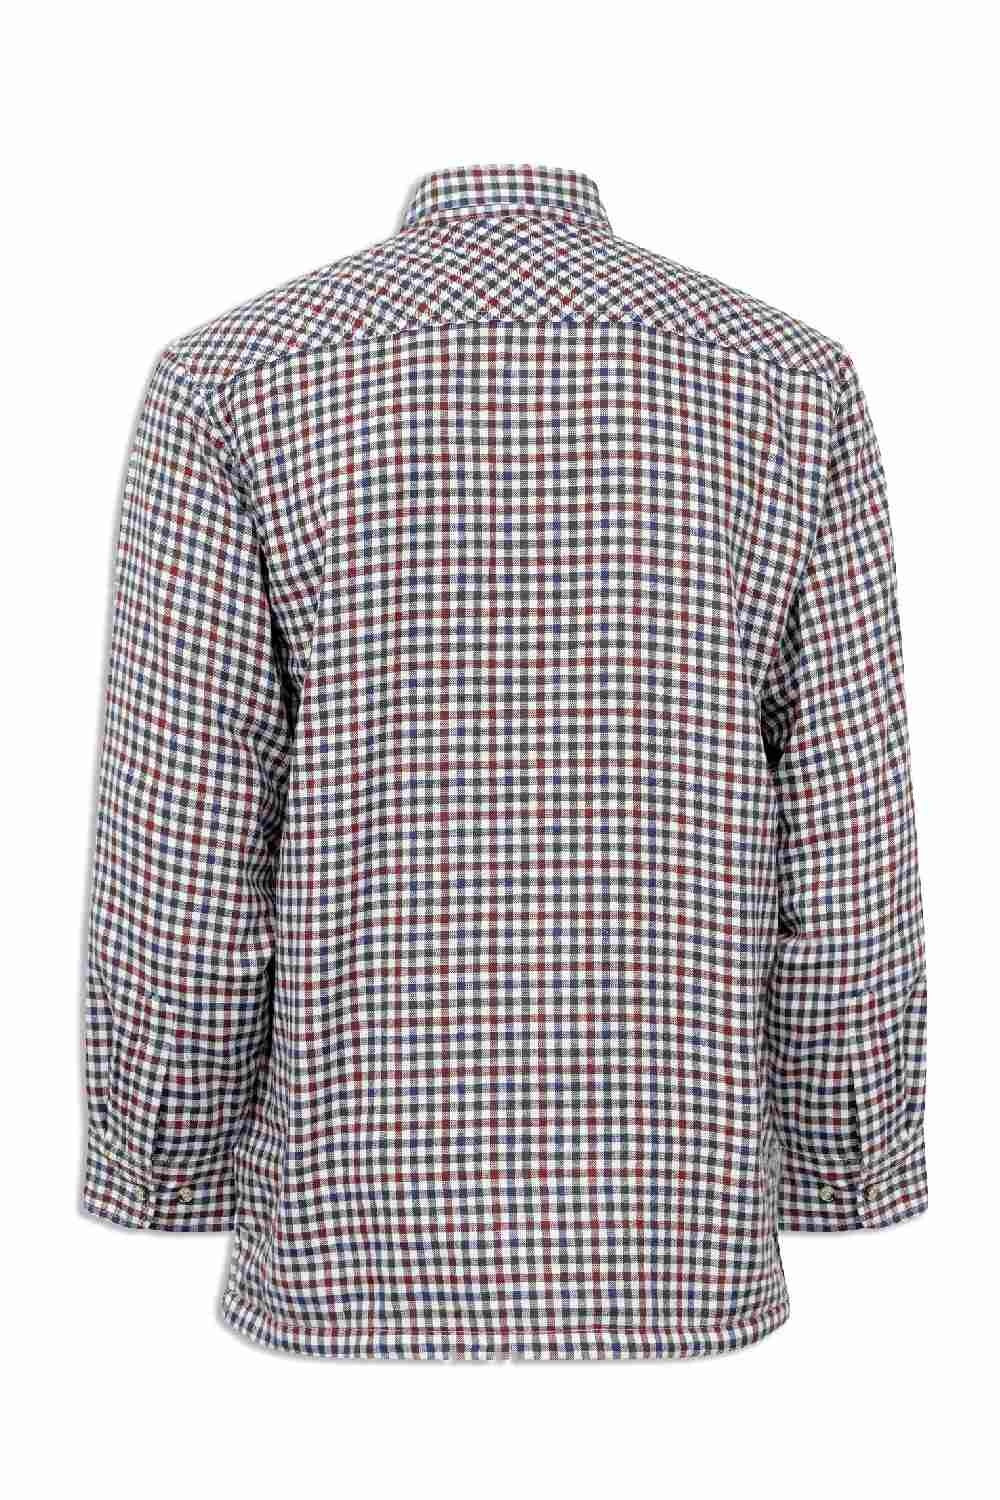 Champion Heathfield Micro Fleece Lined Shirt in Red and Blue Check